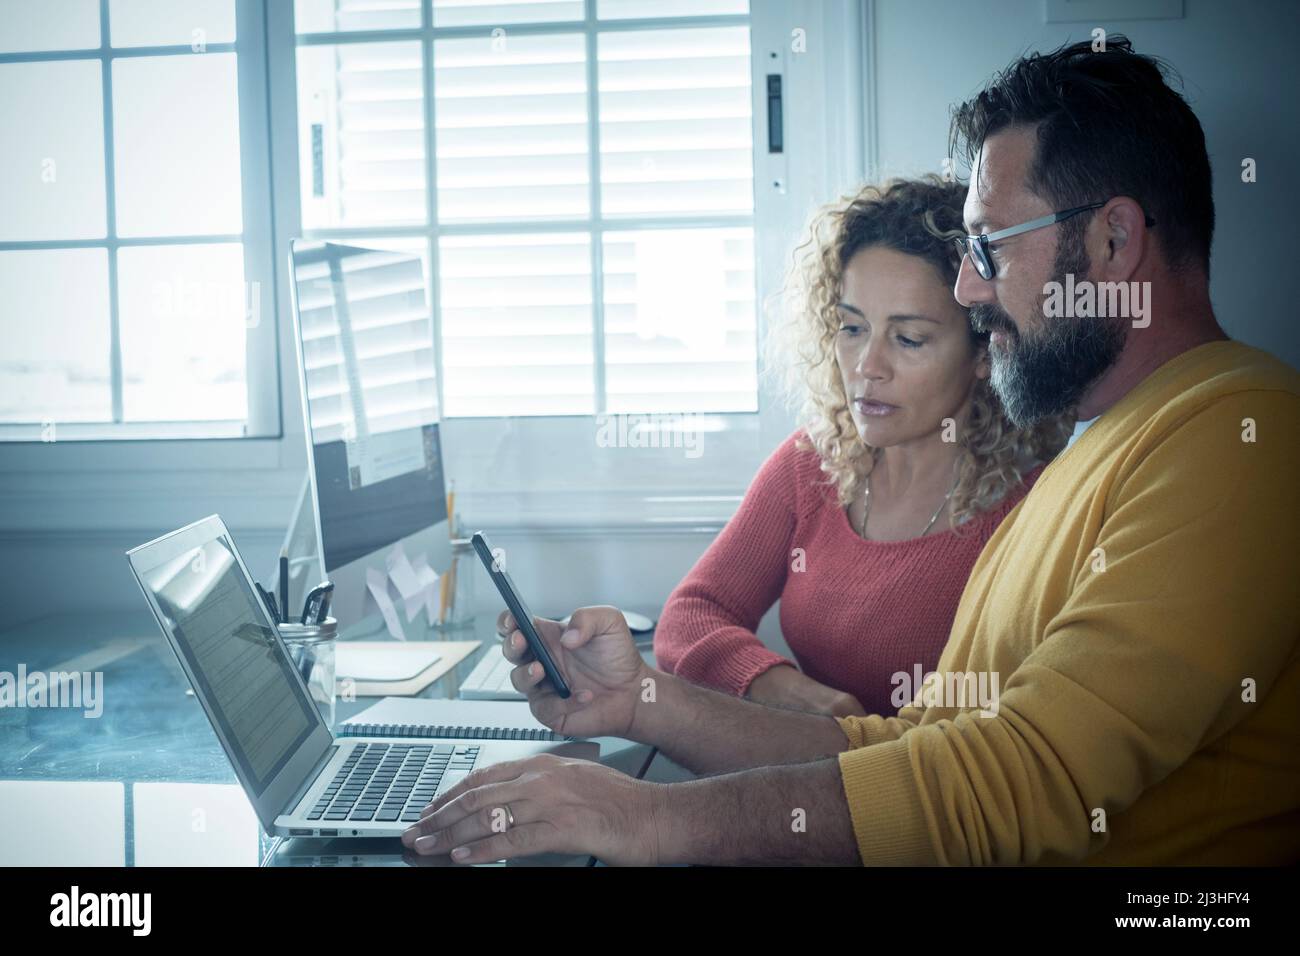 Smart working at home free office lifestyle with adult couple using home and two pc laptop computer on the desktop - modern man and woman online job remote workers bright day light Stock Photo